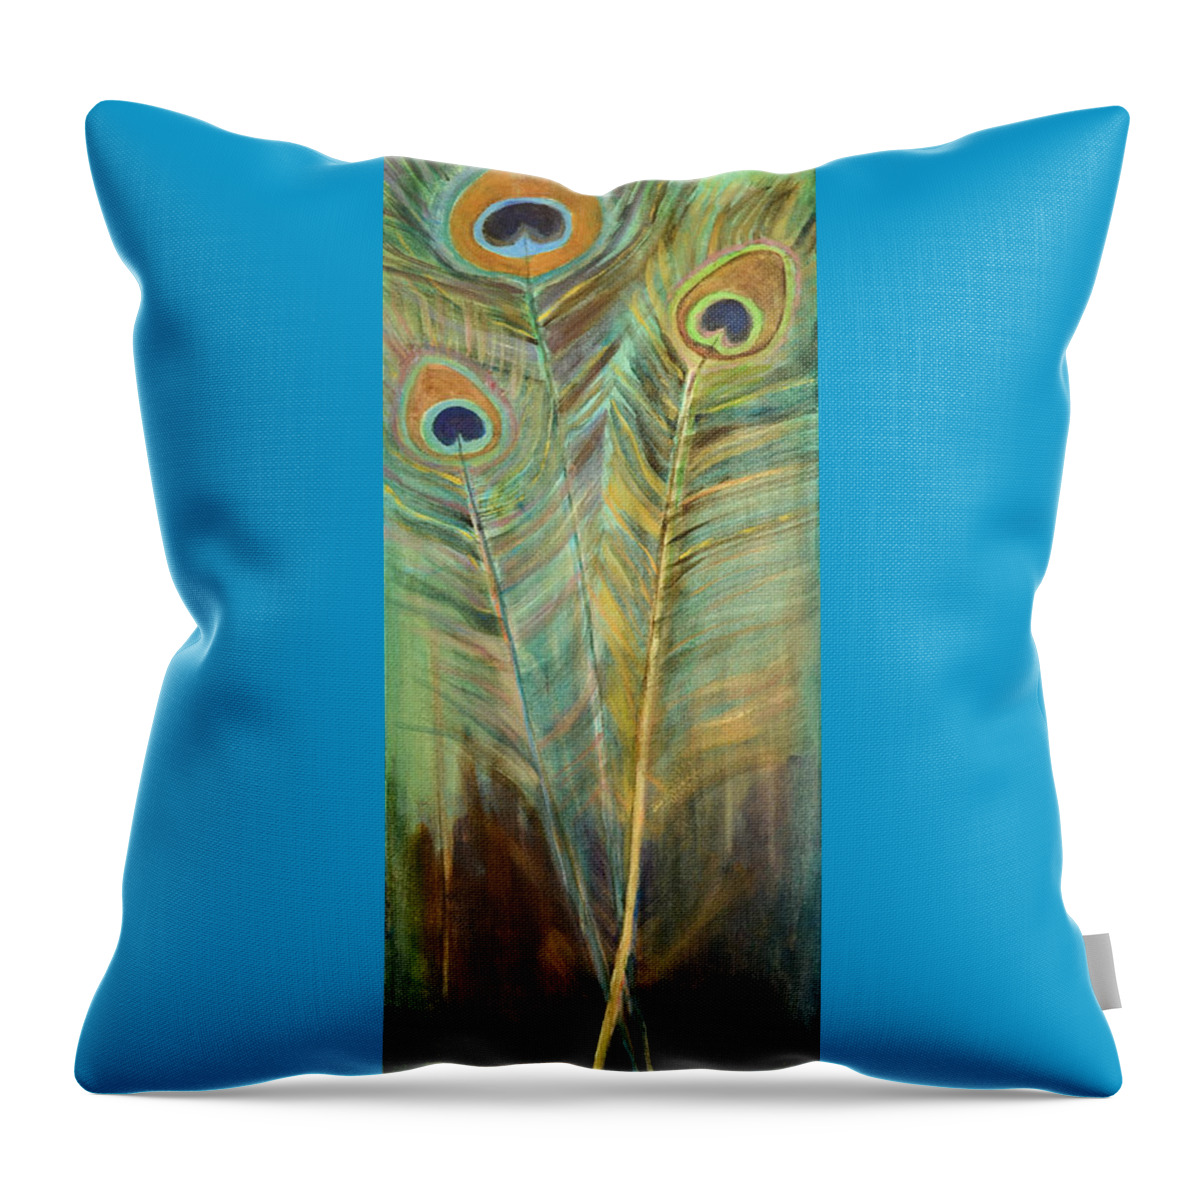 Peacock Throw Pillow featuring the painting Peacock Feathers by Carol Oufnac Mahan